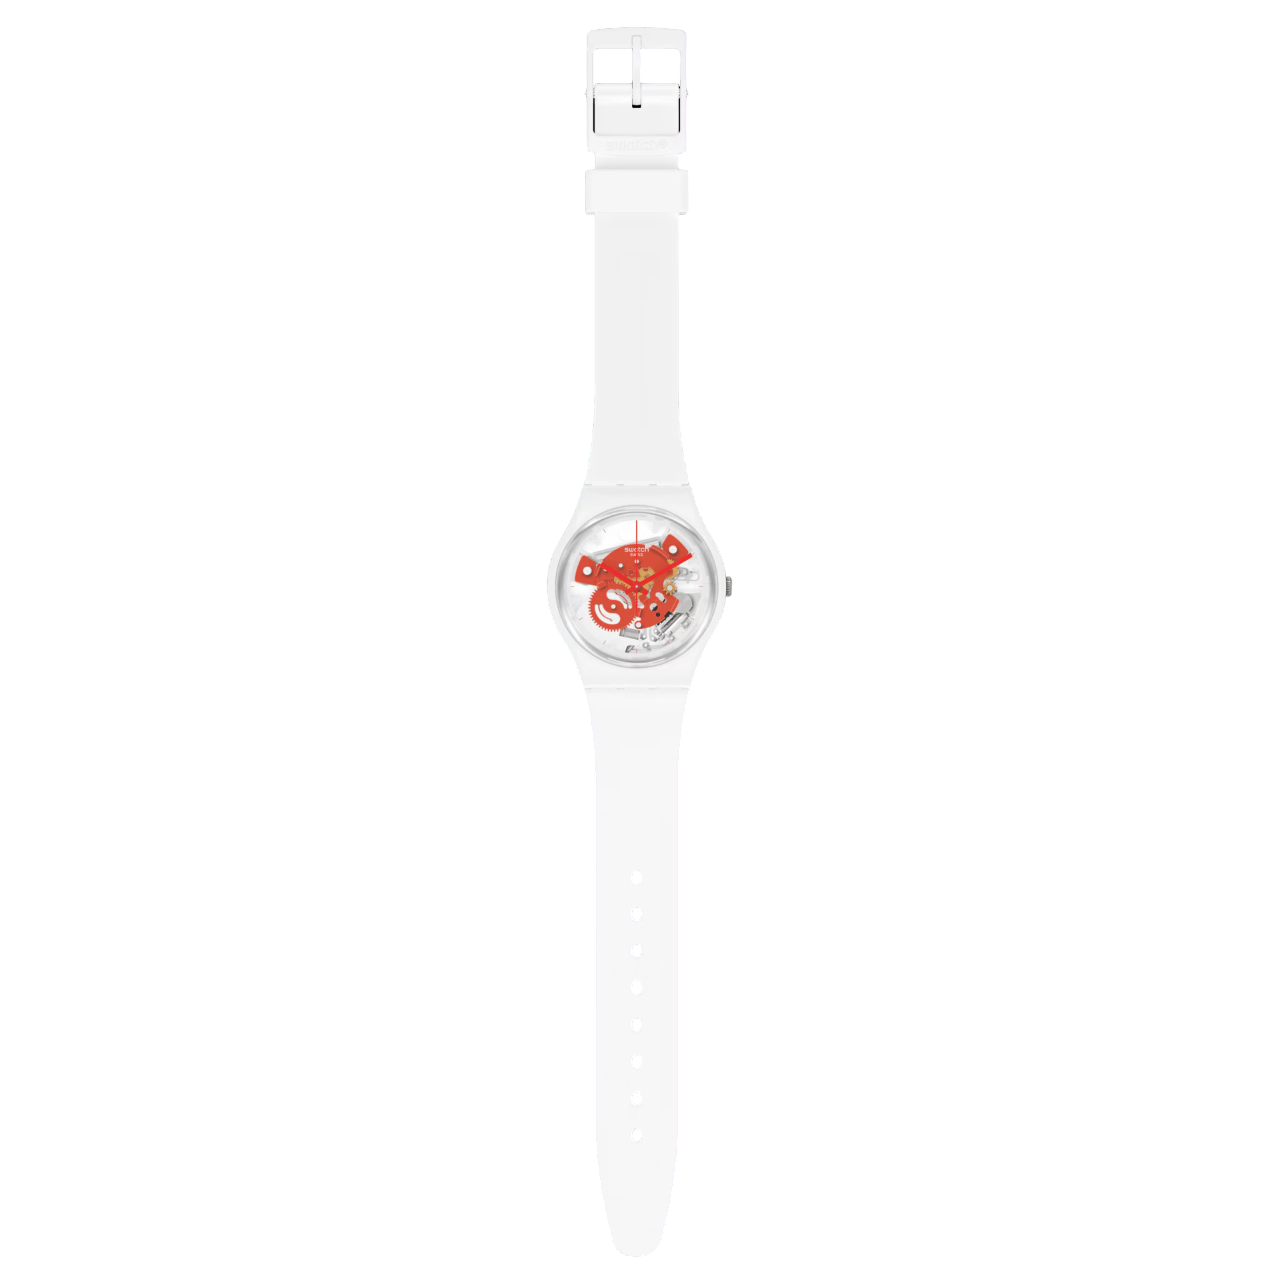 Swatch Orologio Time To Red Small